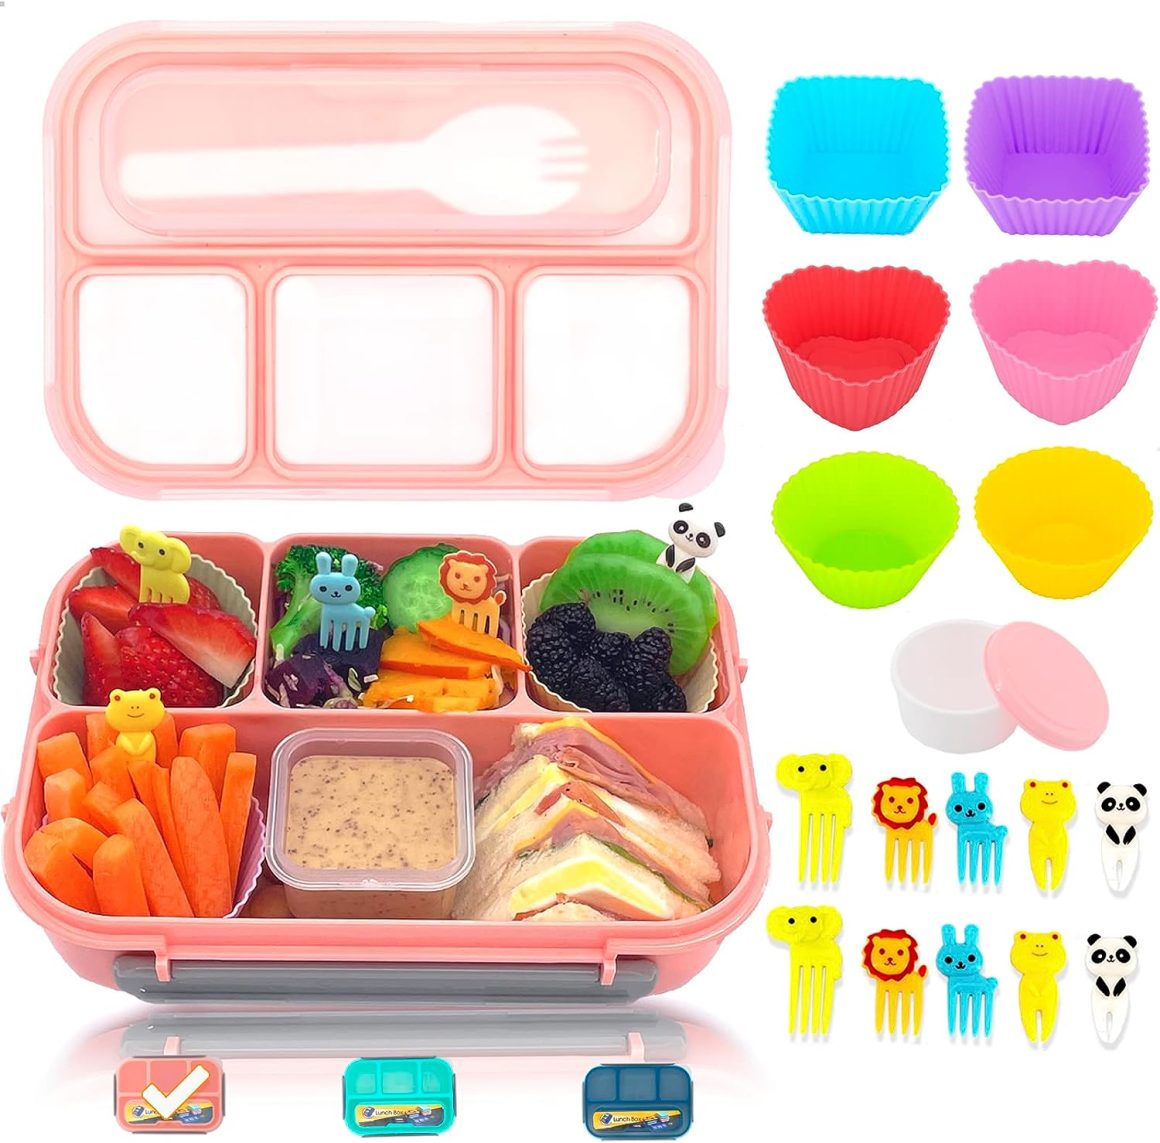 Bento Lunch Box With Accesories from HappyRhino